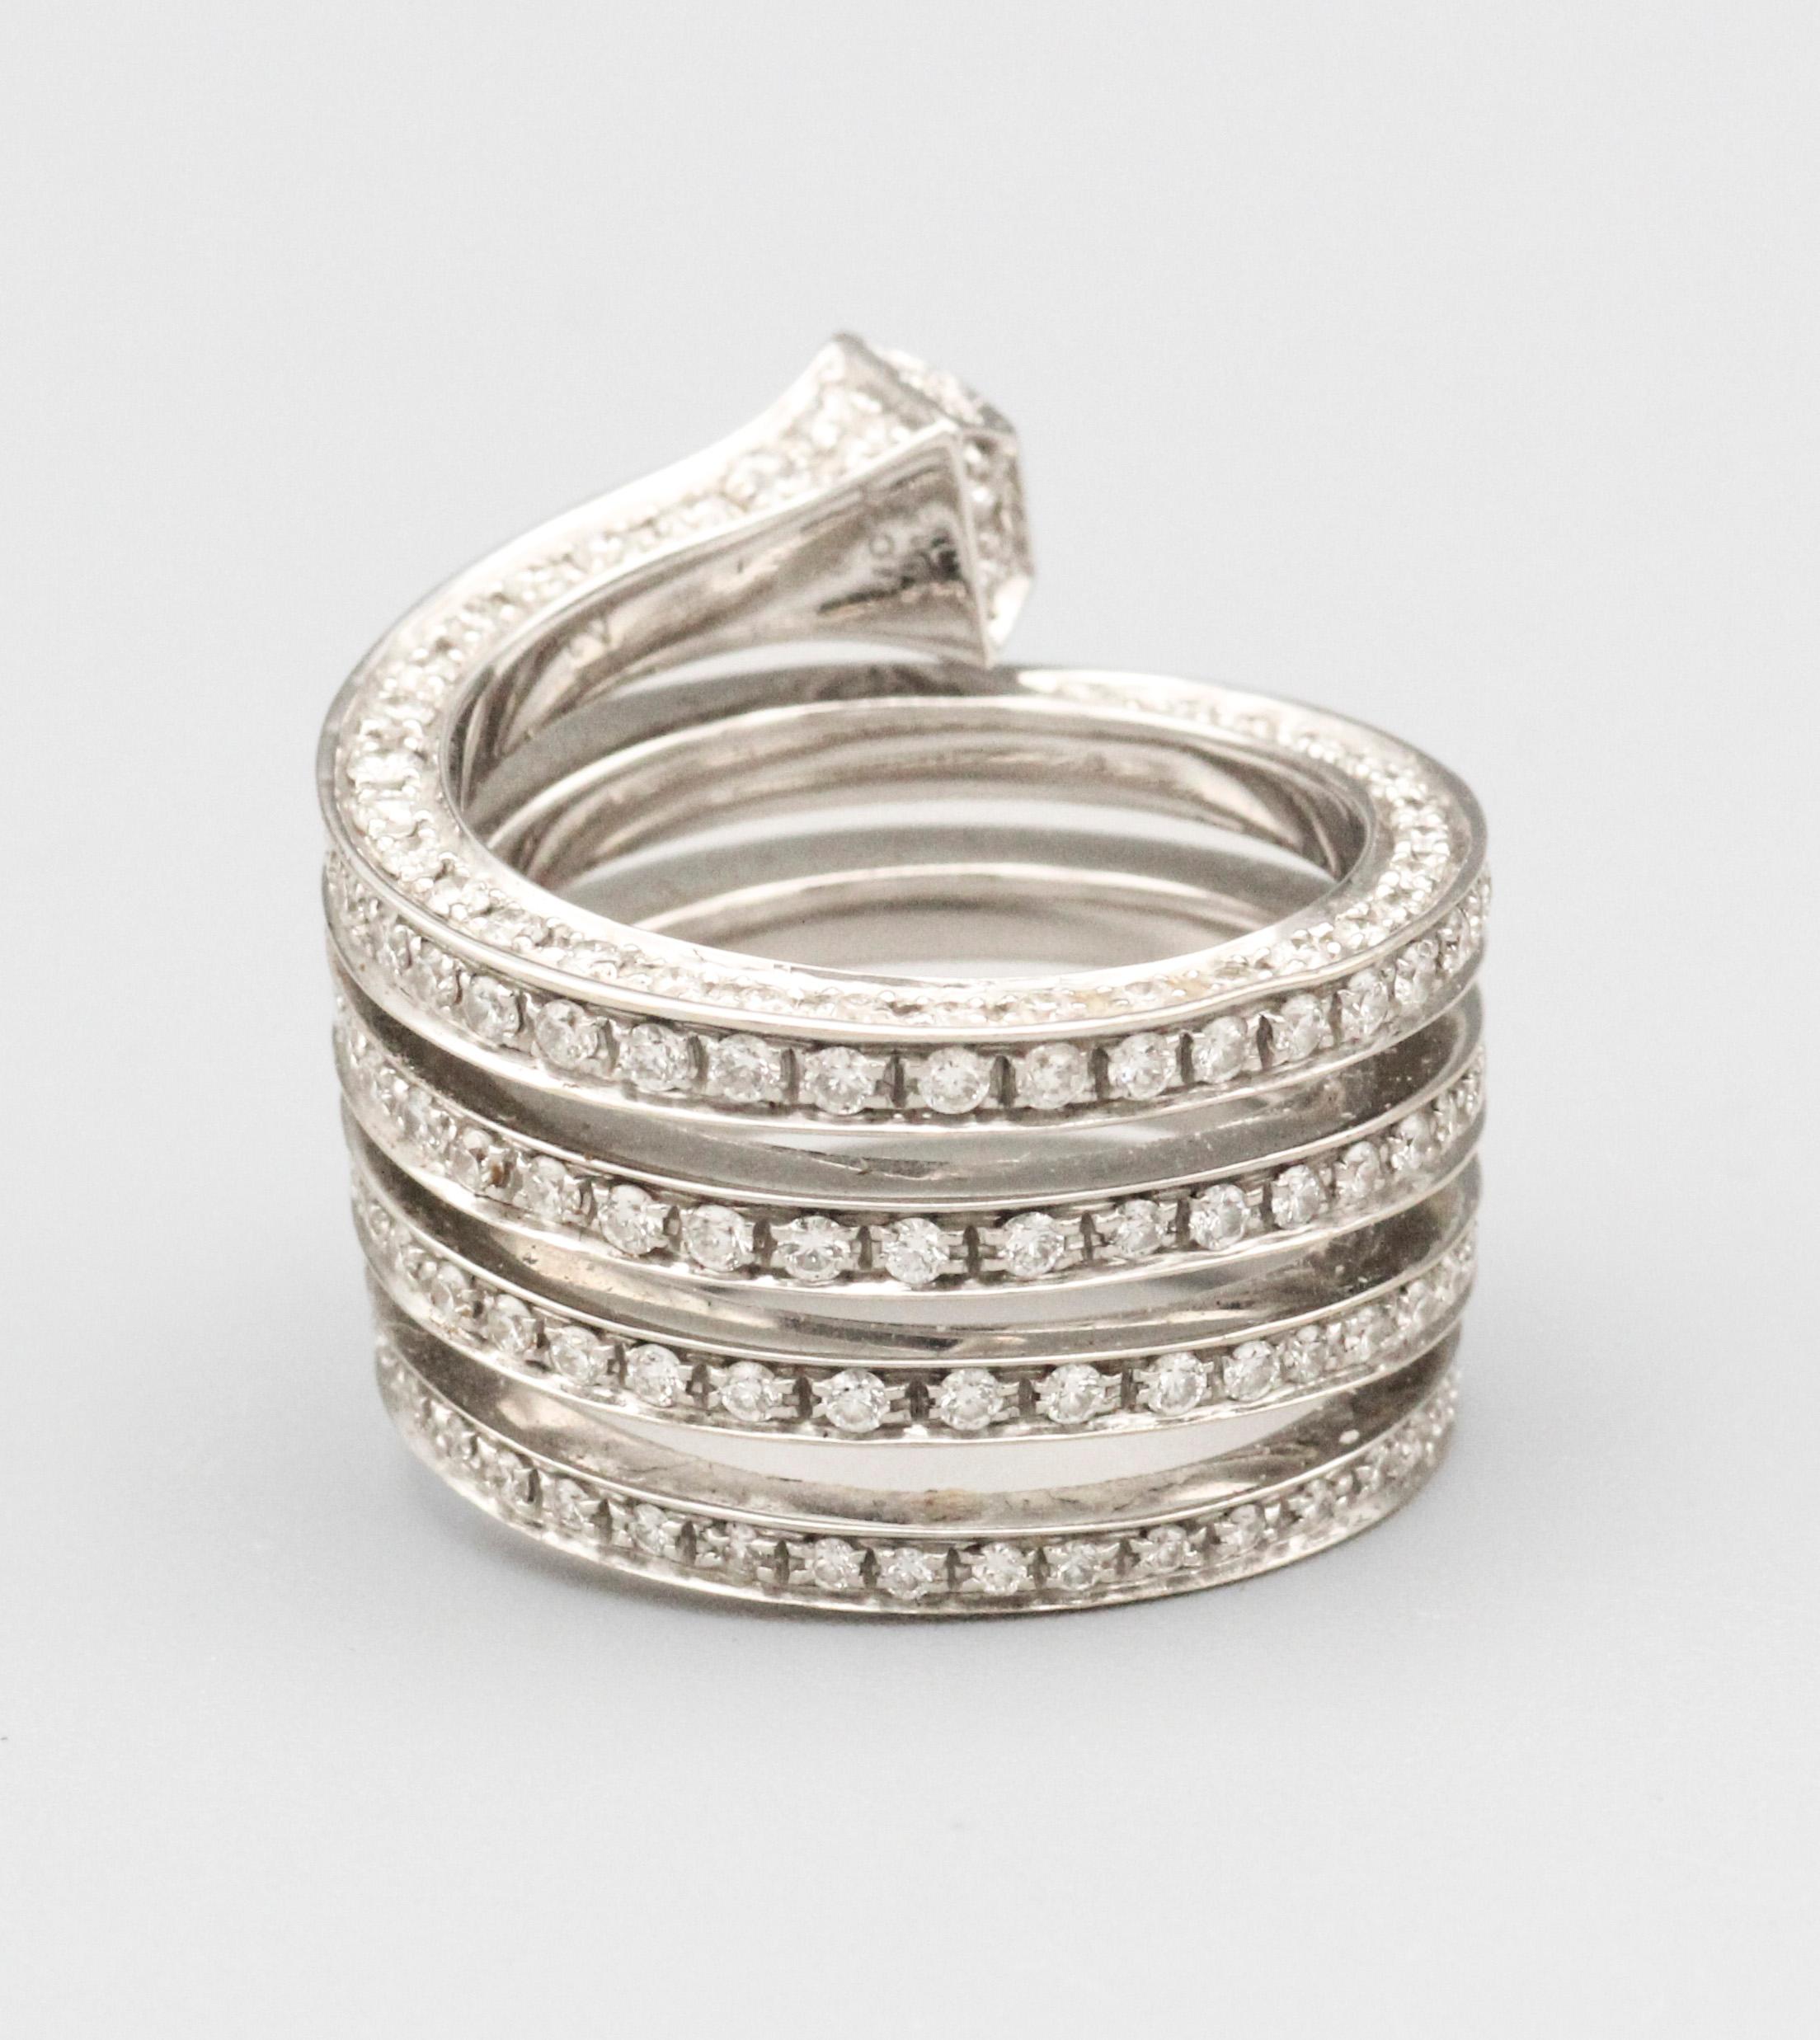 Gucci Chiodo Diamond and 18 Karat White Gold Wrap Around Nail Ring Size 6 In Good Condition For Sale In New York, NY